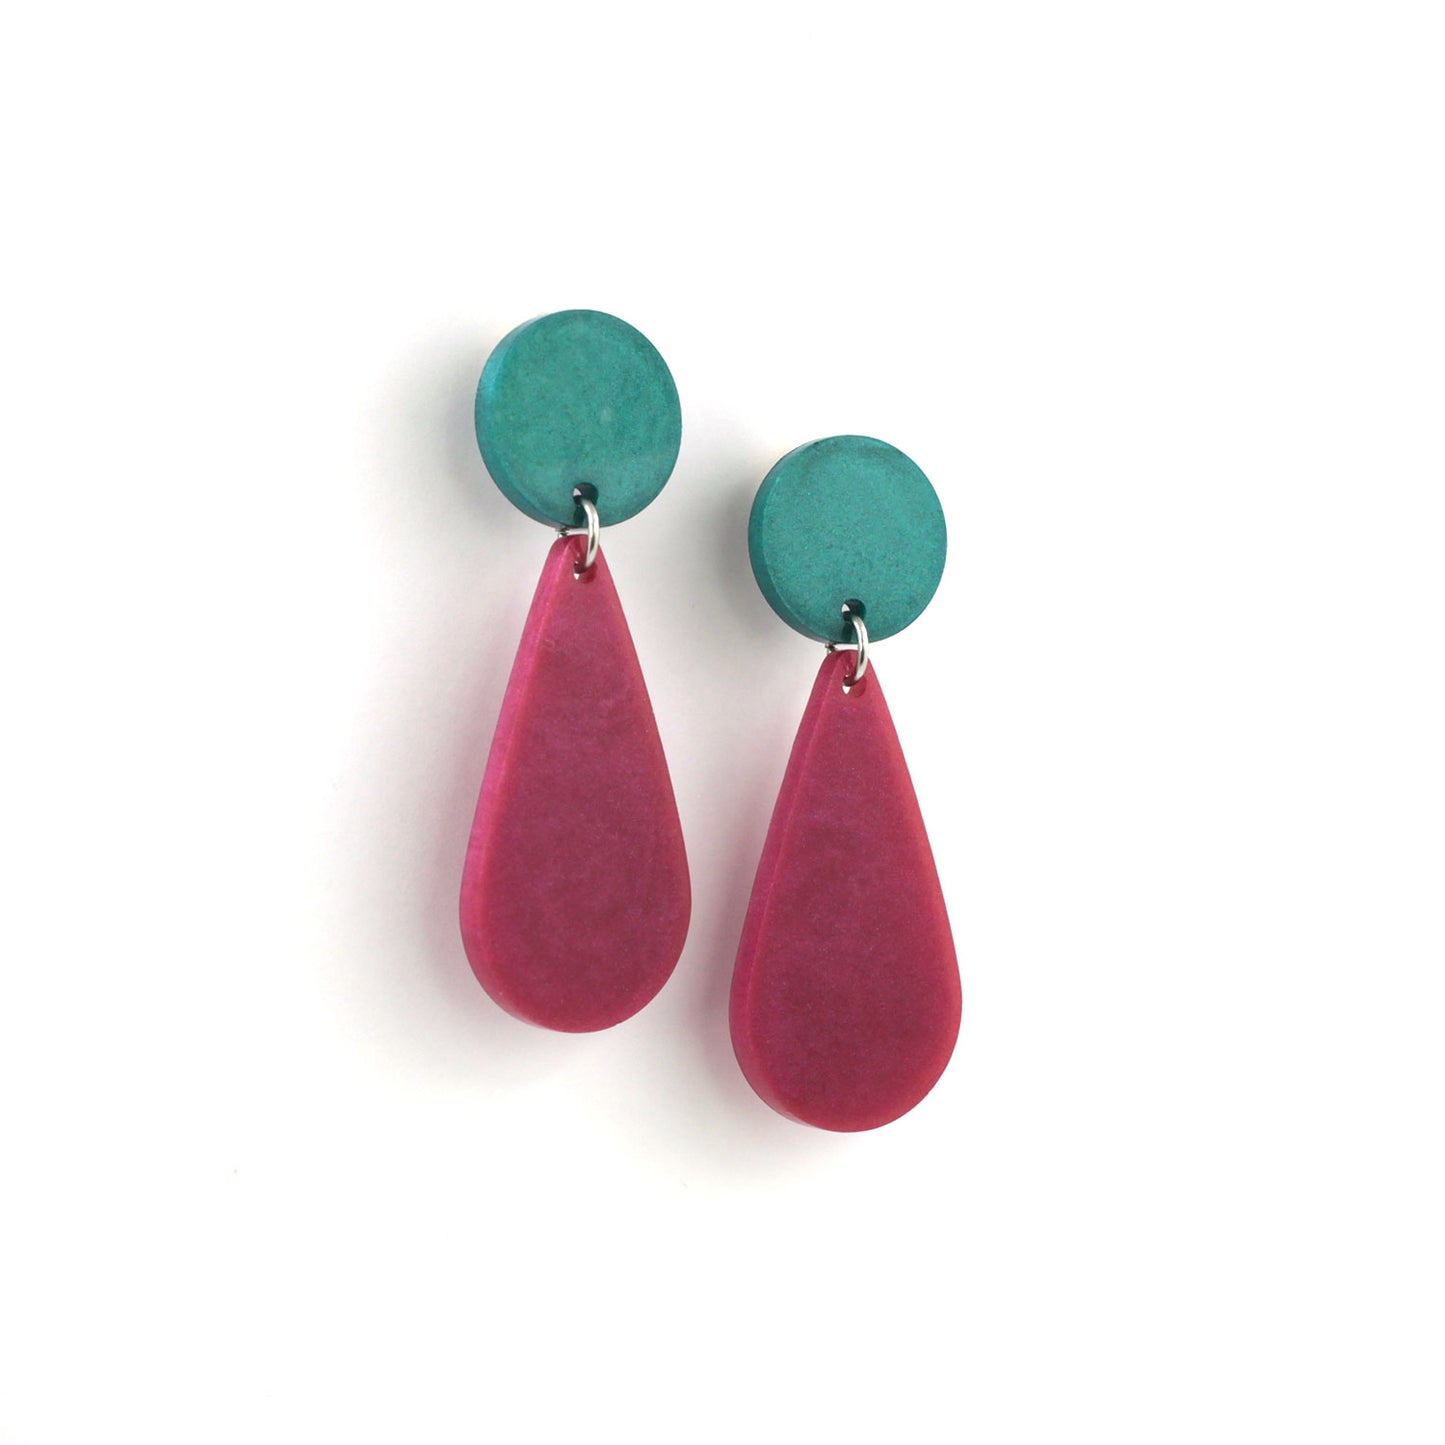 This is a picture of a teardrop dangle earrings on a white background. the top of the earrings is a aqua green dot and the teardrops are dark pink